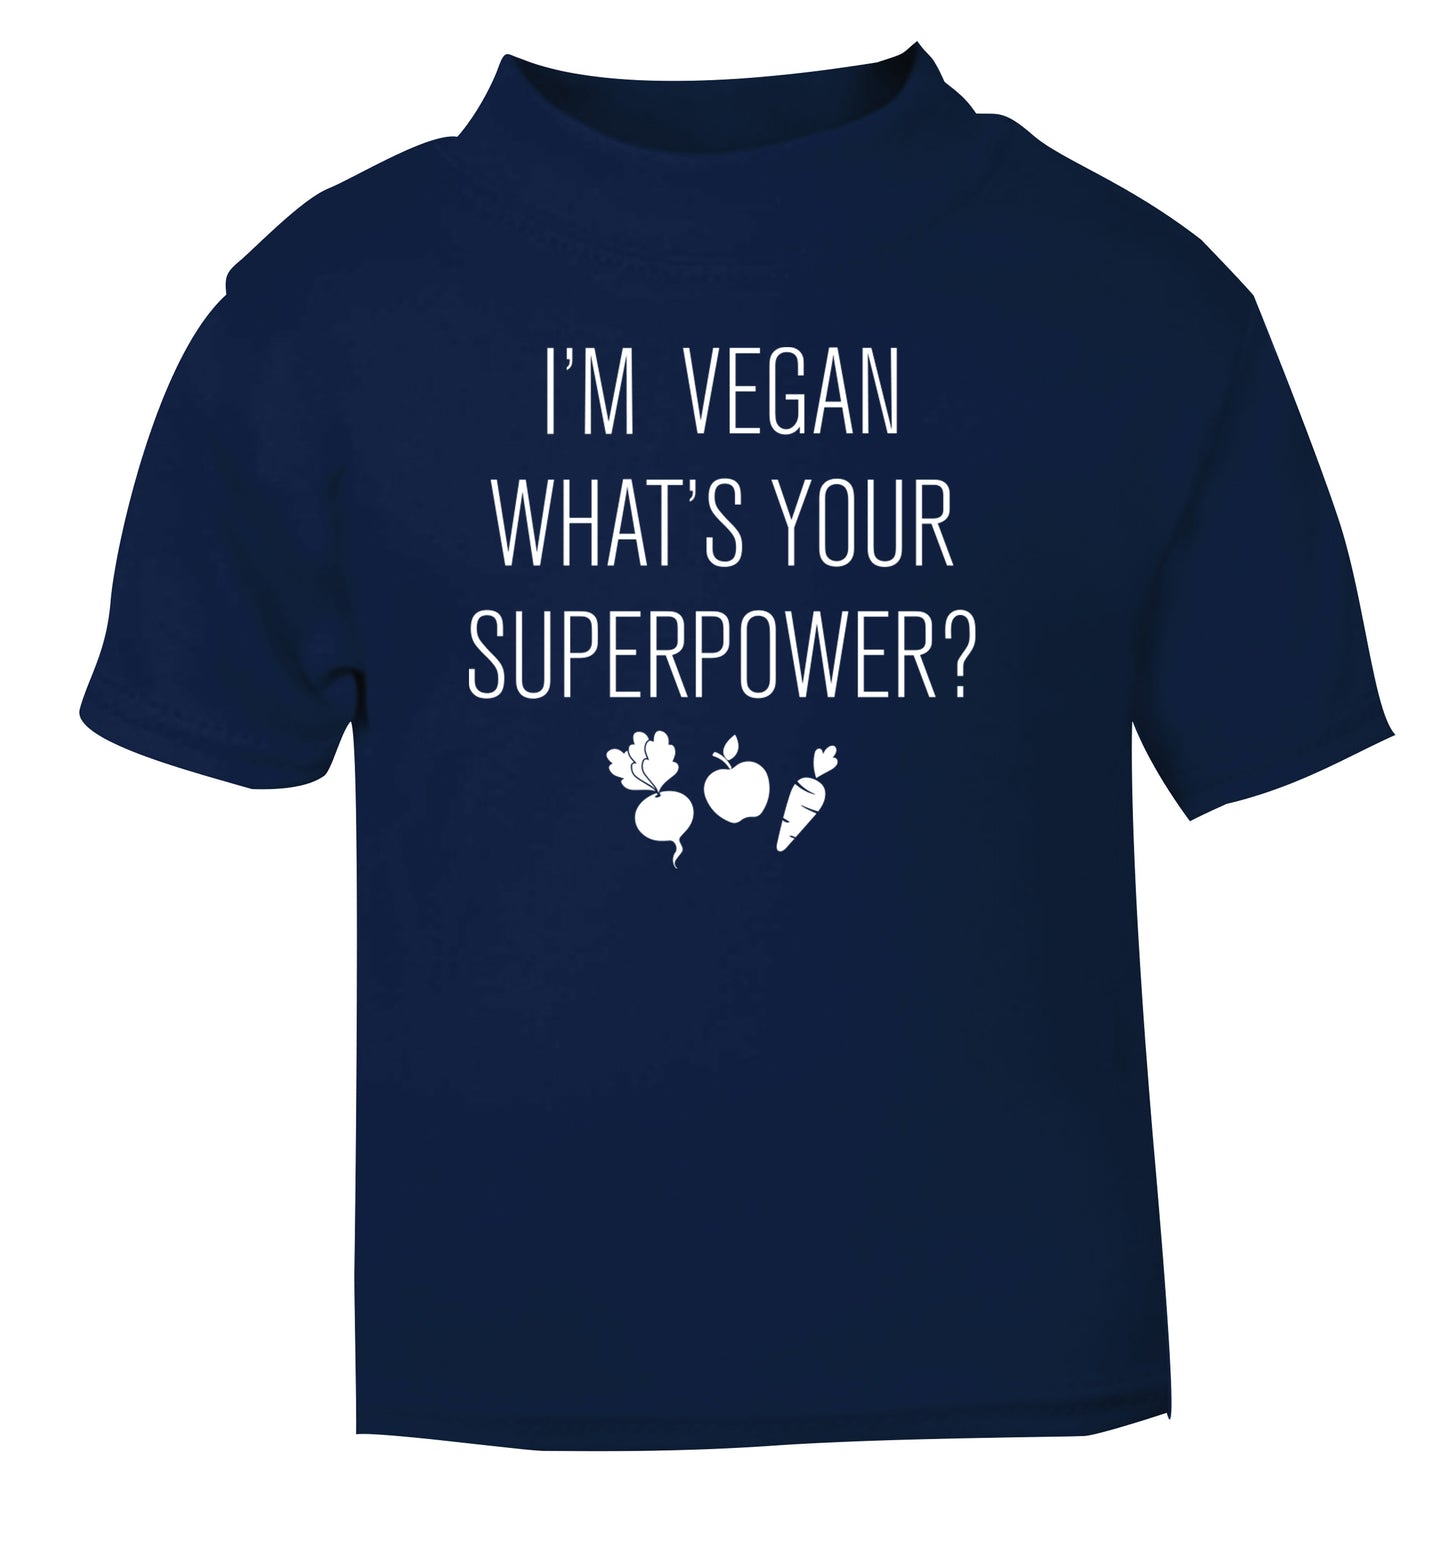 I'm Vegan What's Your Superpower? navy Baby Toddler Tshirt 2 Years